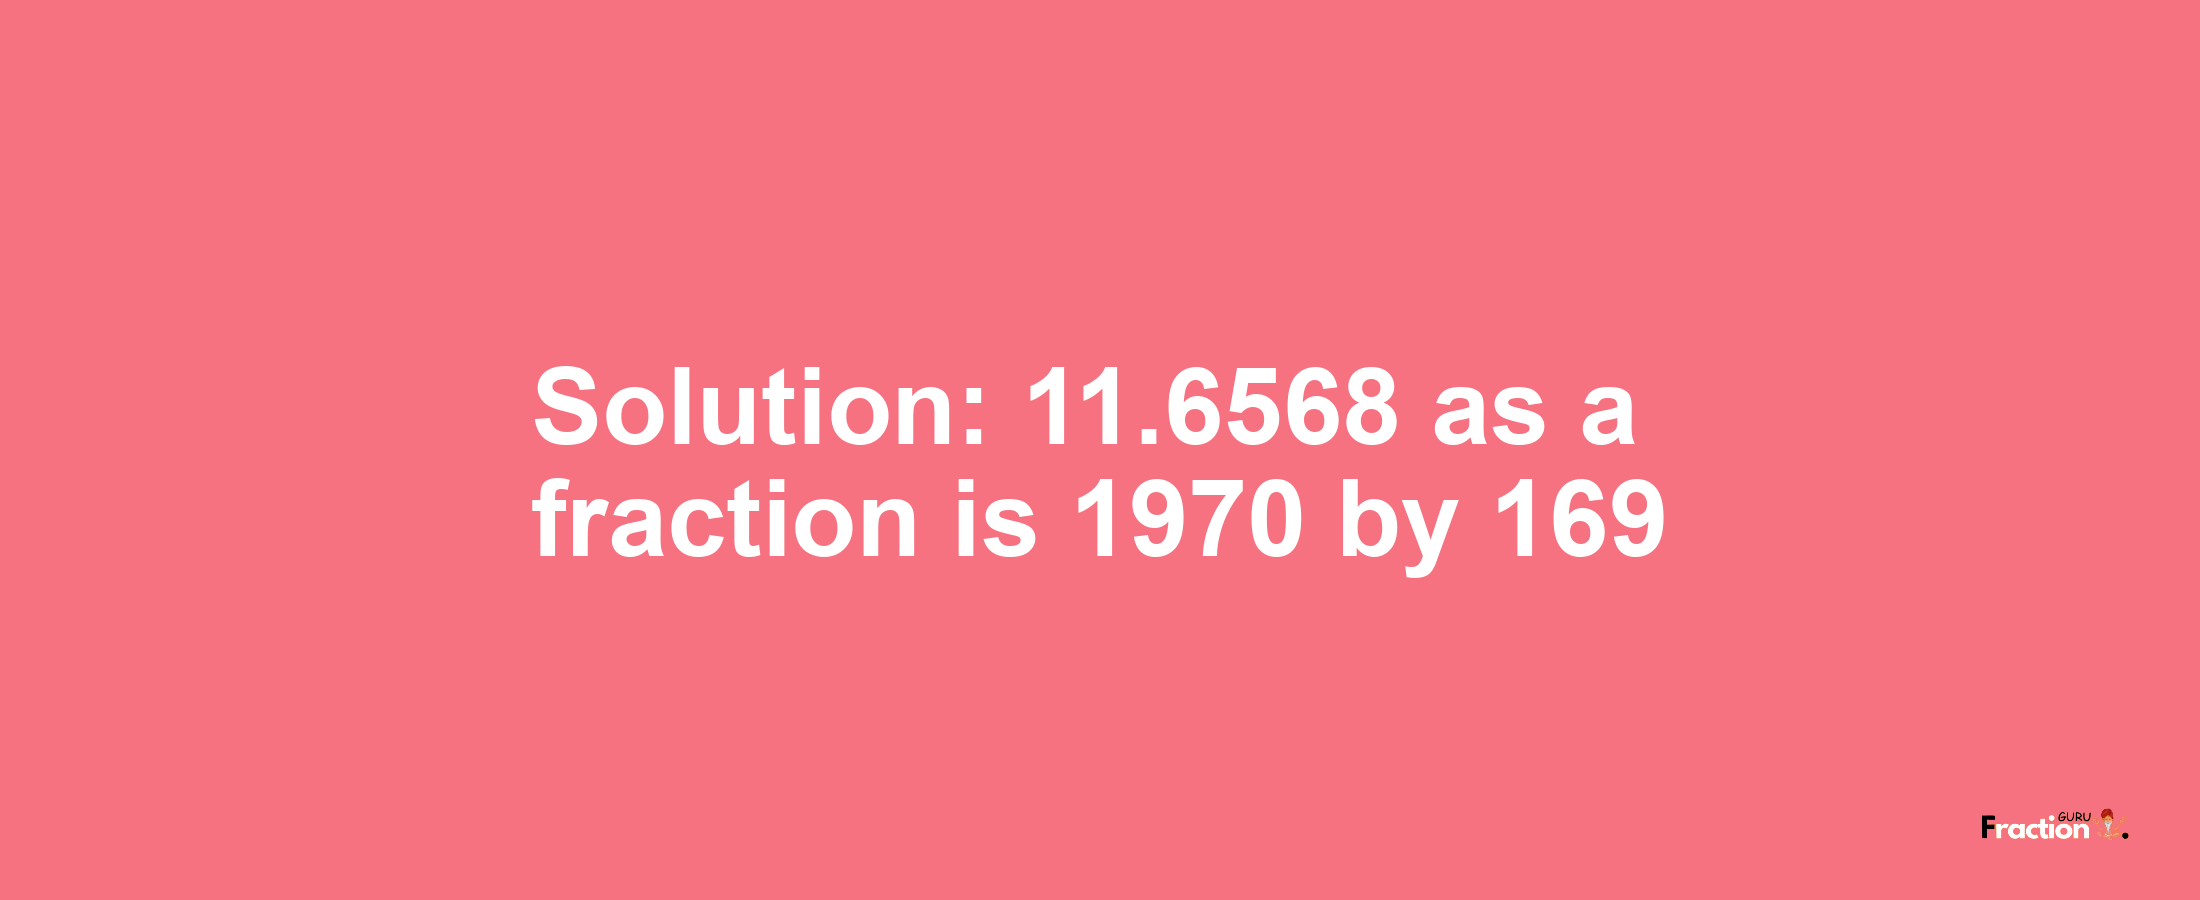 Solution:11.6568 as a fraction is 1970/169